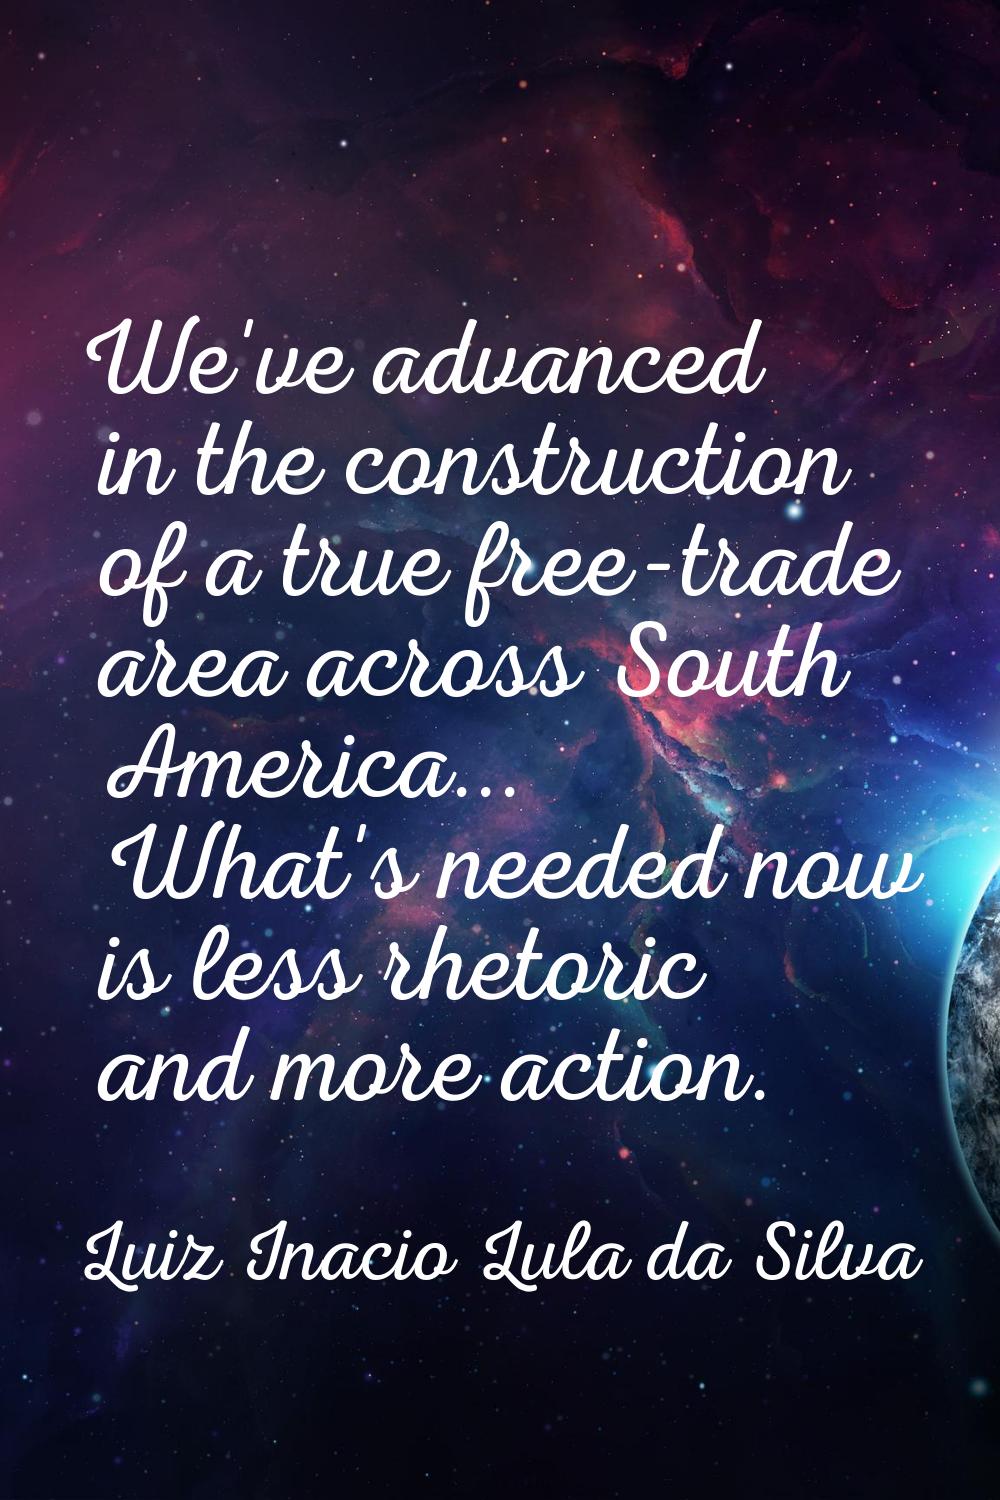 We've advanced in the construction of a true free-trade area across South America... What's needed 